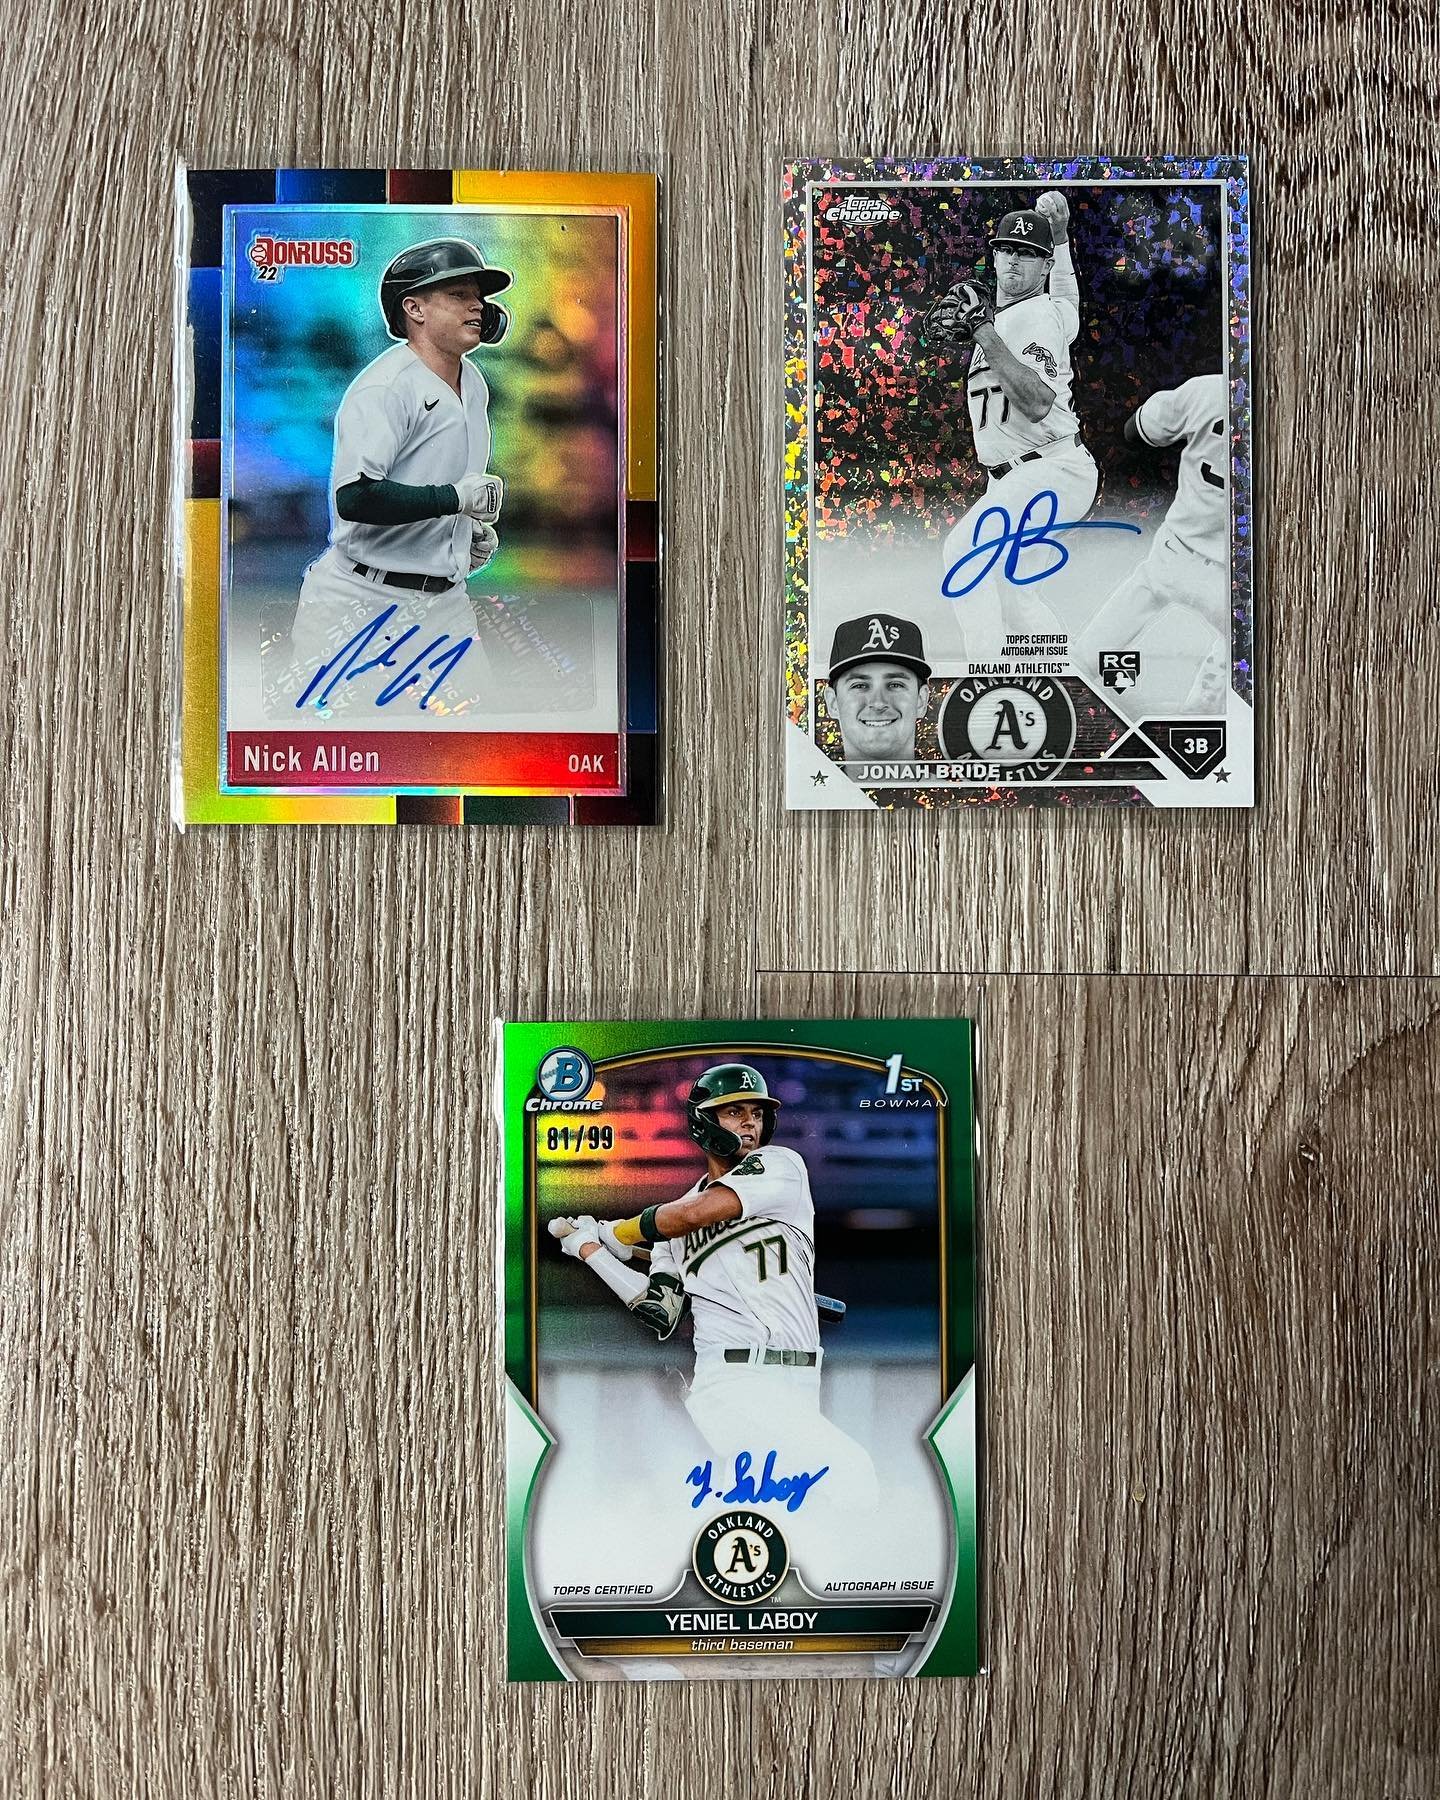 I added a few cards to the PC this week. Nick Allen 2022 Donruss Gold Parallel auto 06/10. Jonah Bride 2023 Topps Chrome Black and White Mini-Diamond auto. Yeniel Laboy 2023 Bowman Chrome Green Refractor auto 81/99. #Athletics #Collect